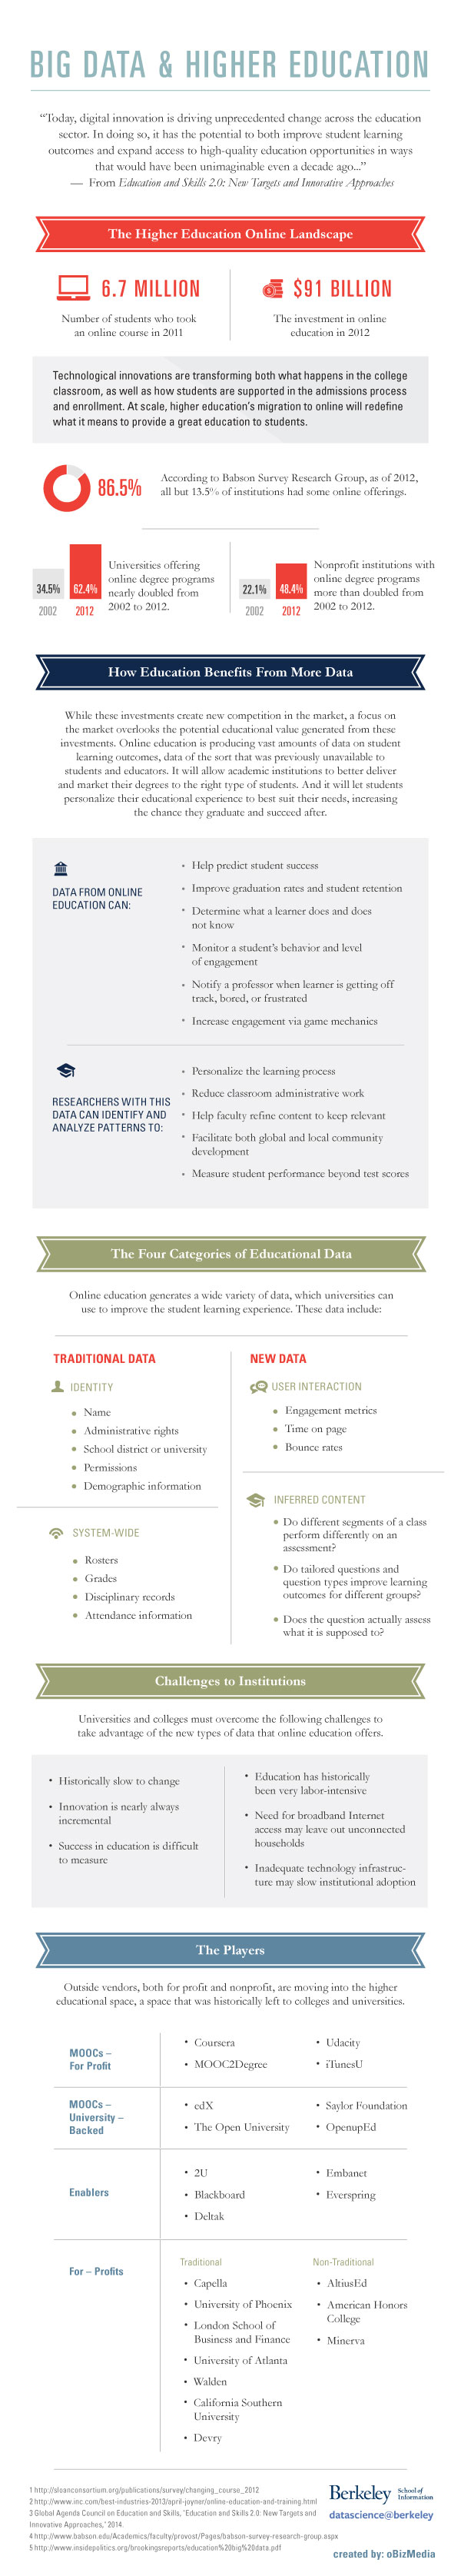 Big Data and Higher Education infographic